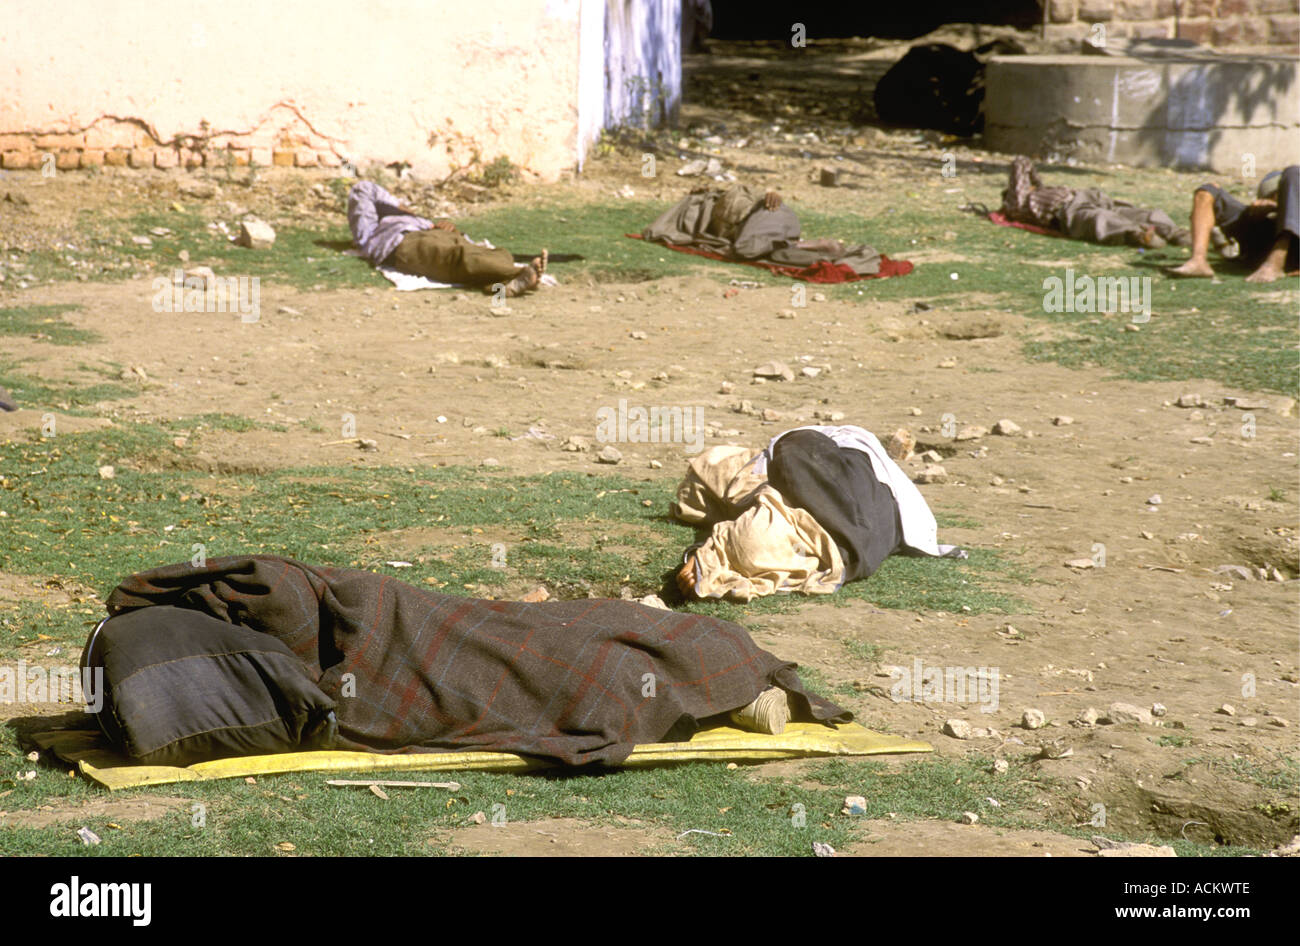 Poor people sleeping rough at the side of a street in Agra Uttar Pradesh India This is within a few miles of the Taj Mahal Stock Photo